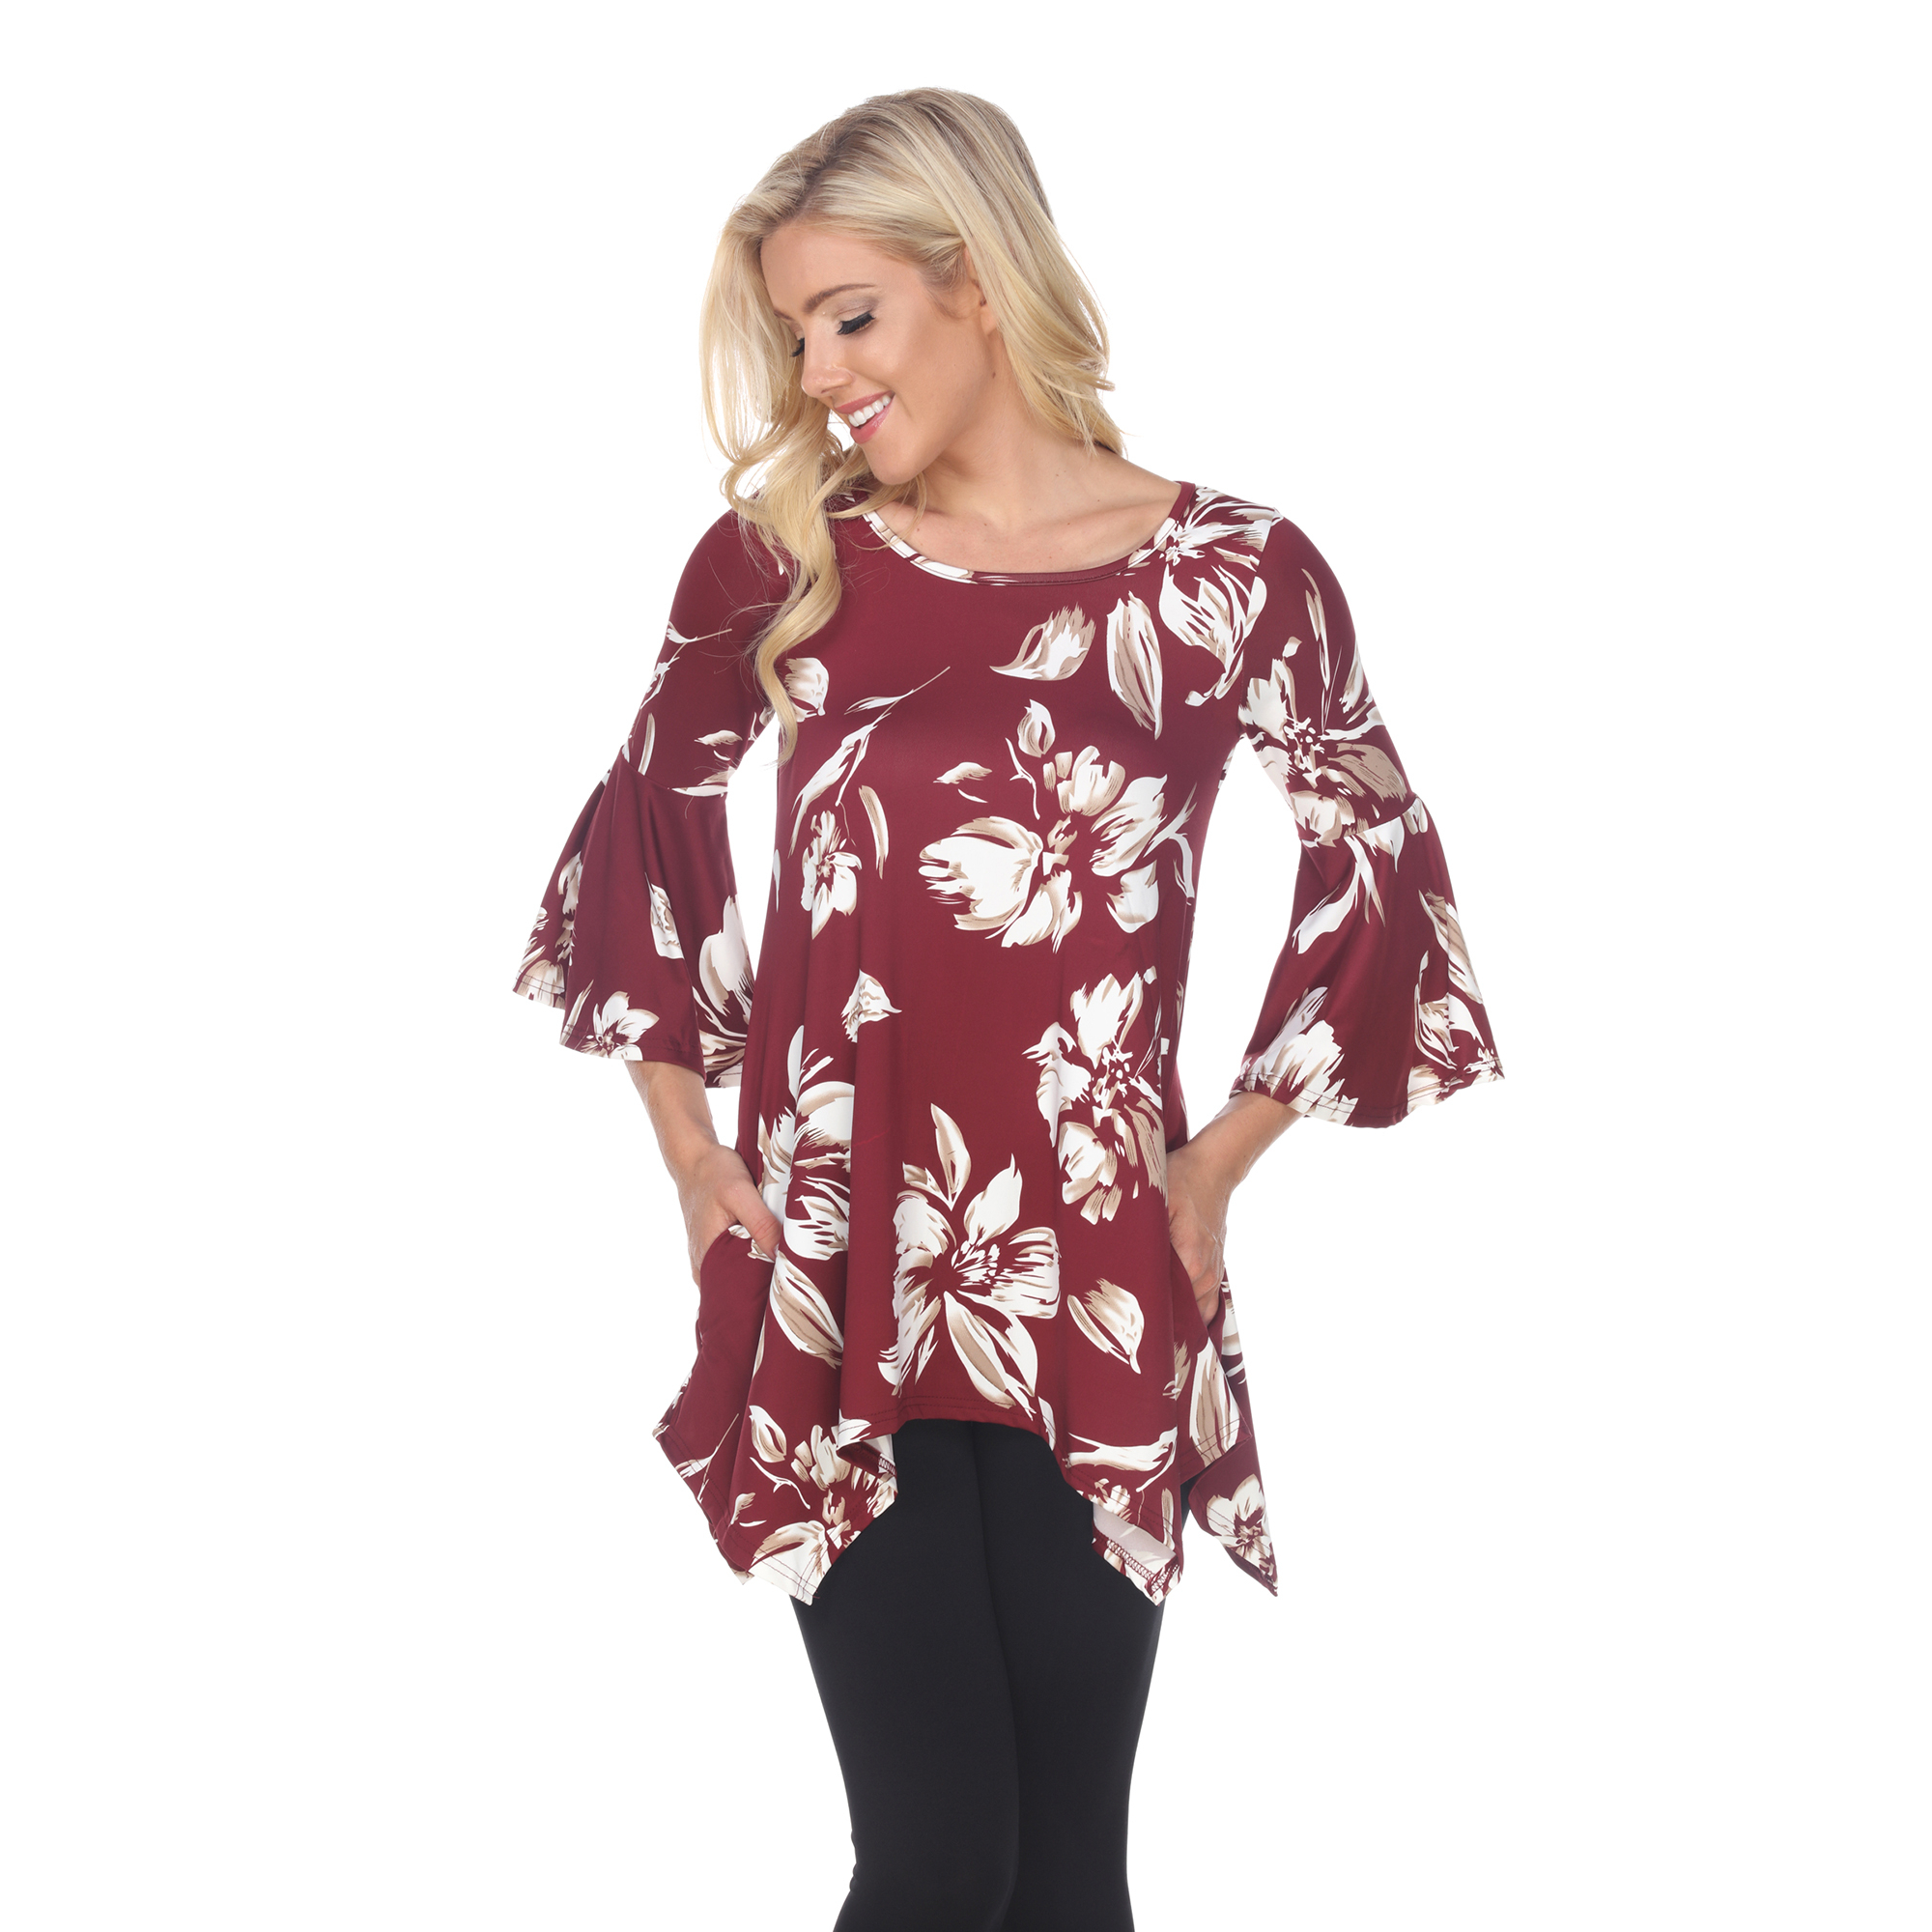 White Mark Women's Floral Print Quarter Sleeve Tunic Top With Pockets - Red, X-Large